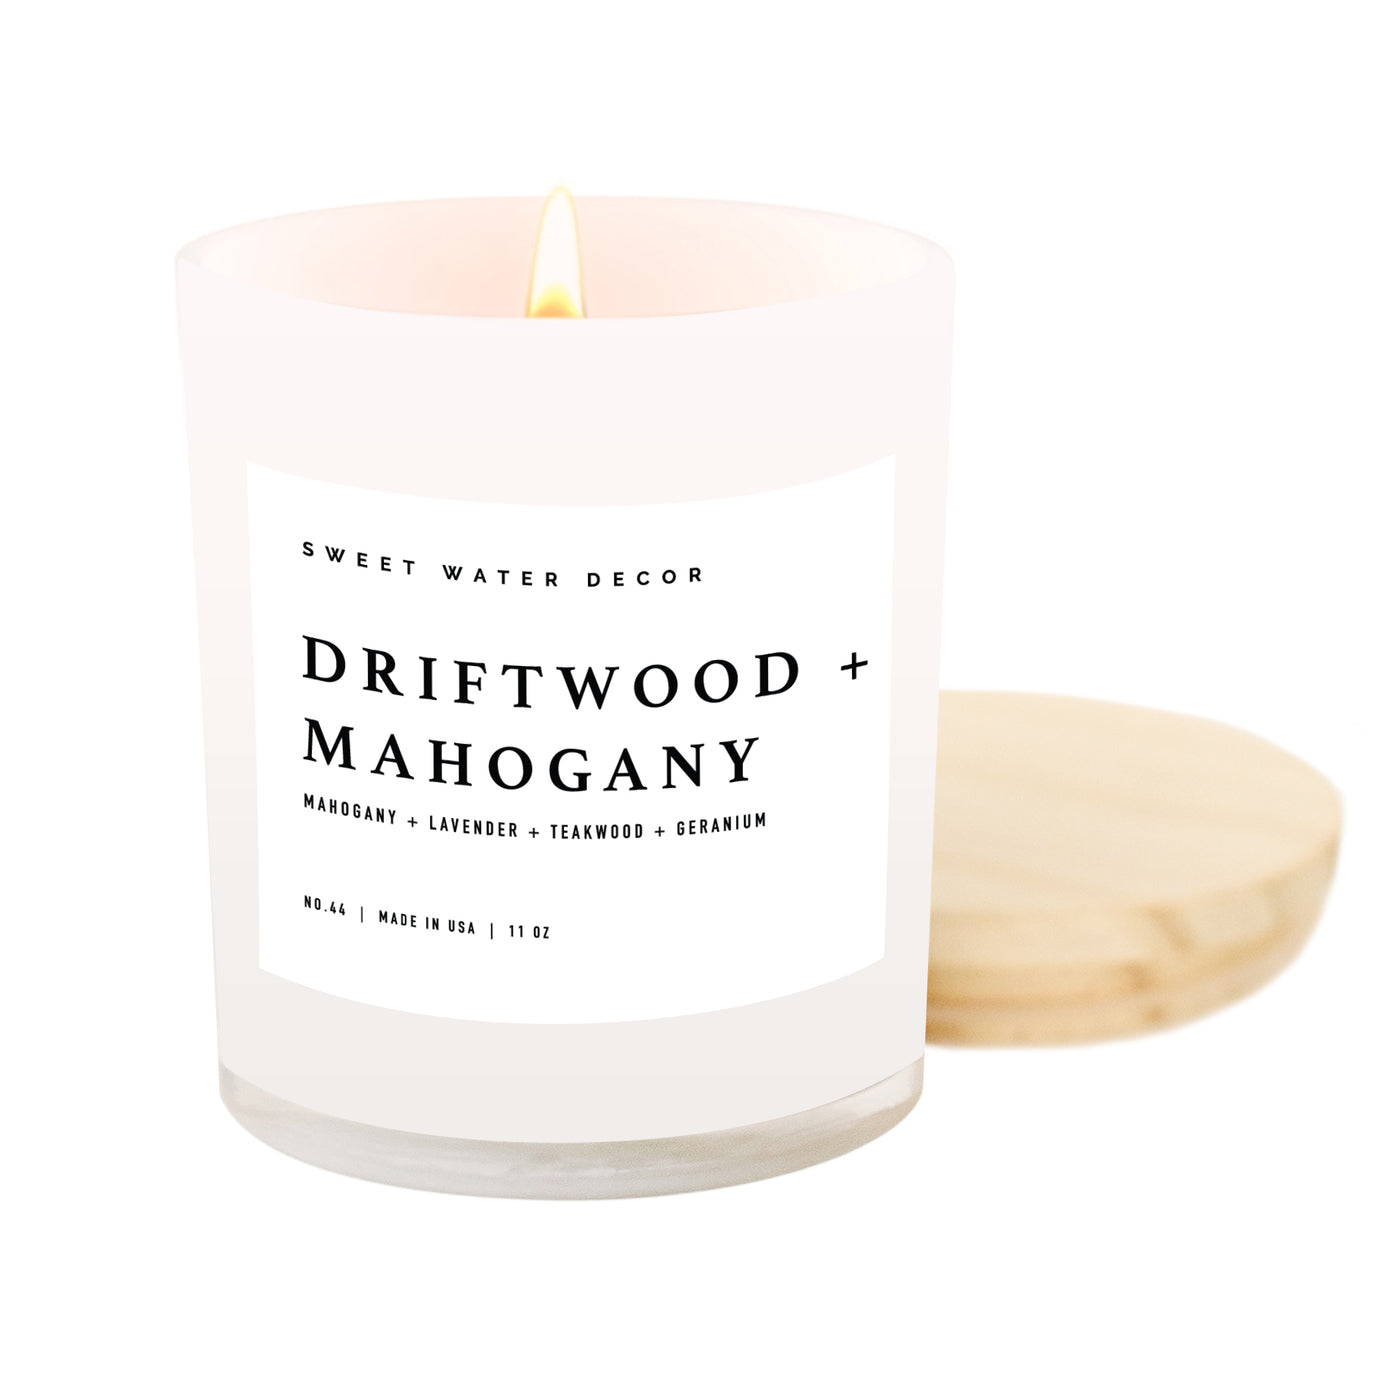 Driftwood and Mahogany Soy Candle - White Jar - 11 oz - Sweet Water Decor - Candles